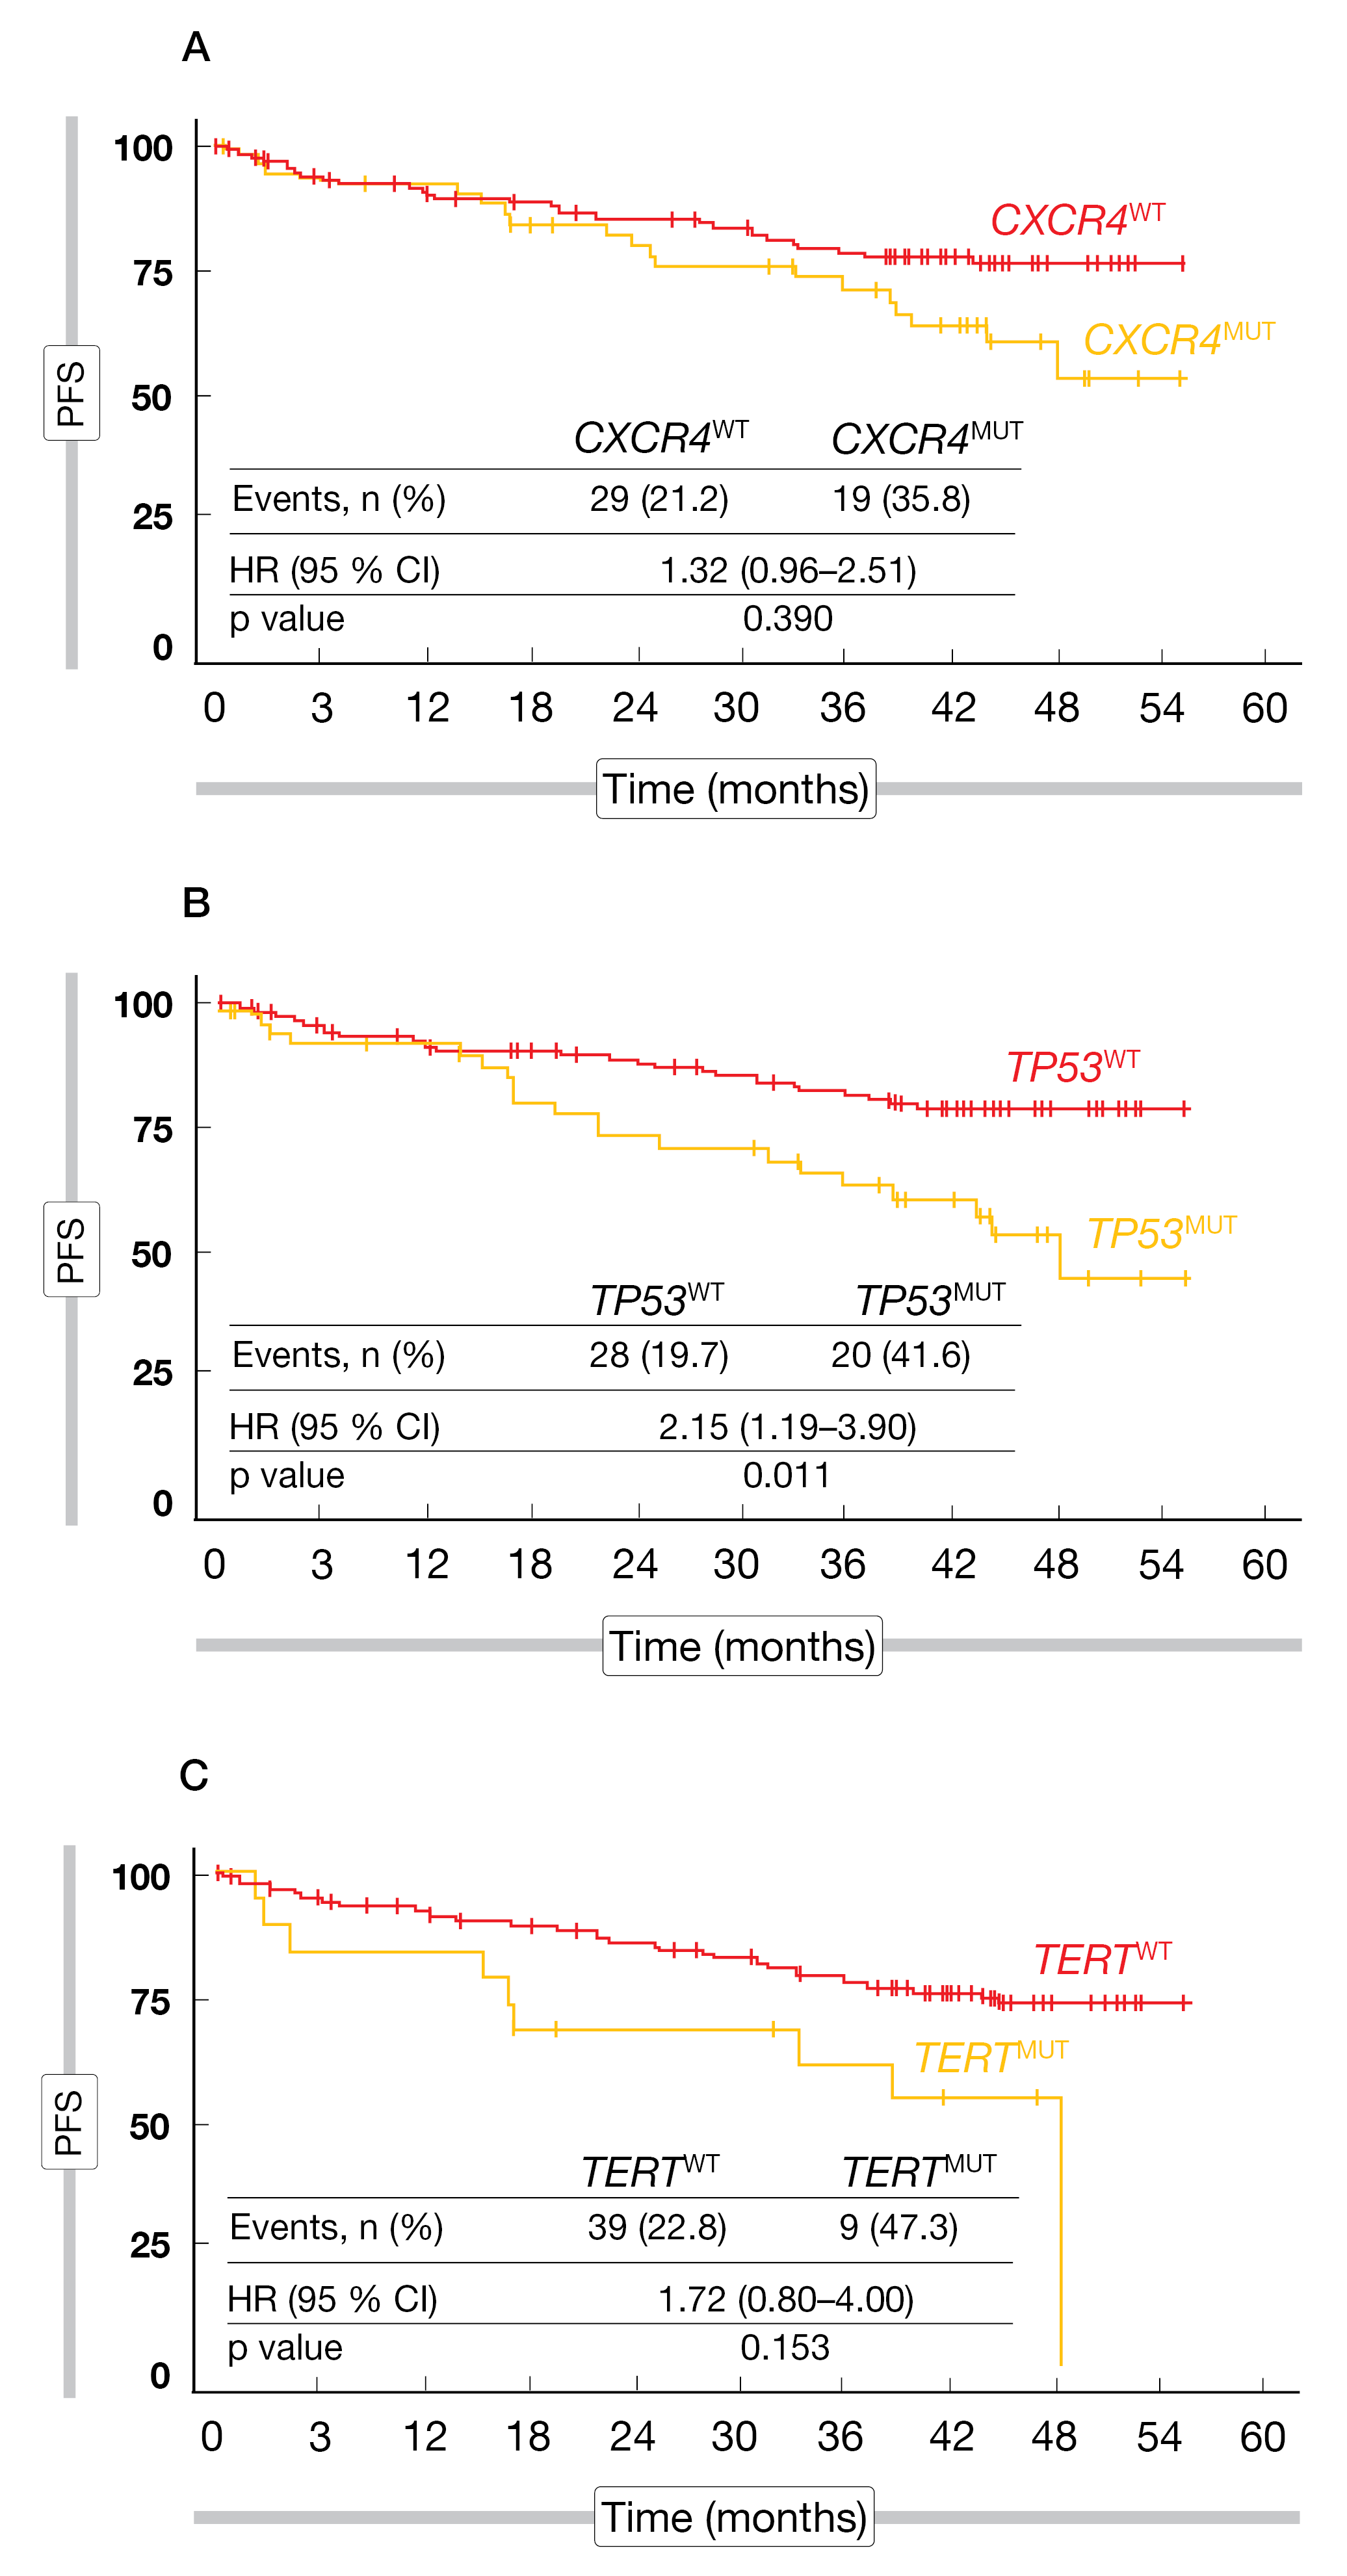 Figure 2: Progression-free survival (PFS) in patients with MYD88MUT WM by (A) CXCR4, (B) TP53 and (C) TERT mutational status.